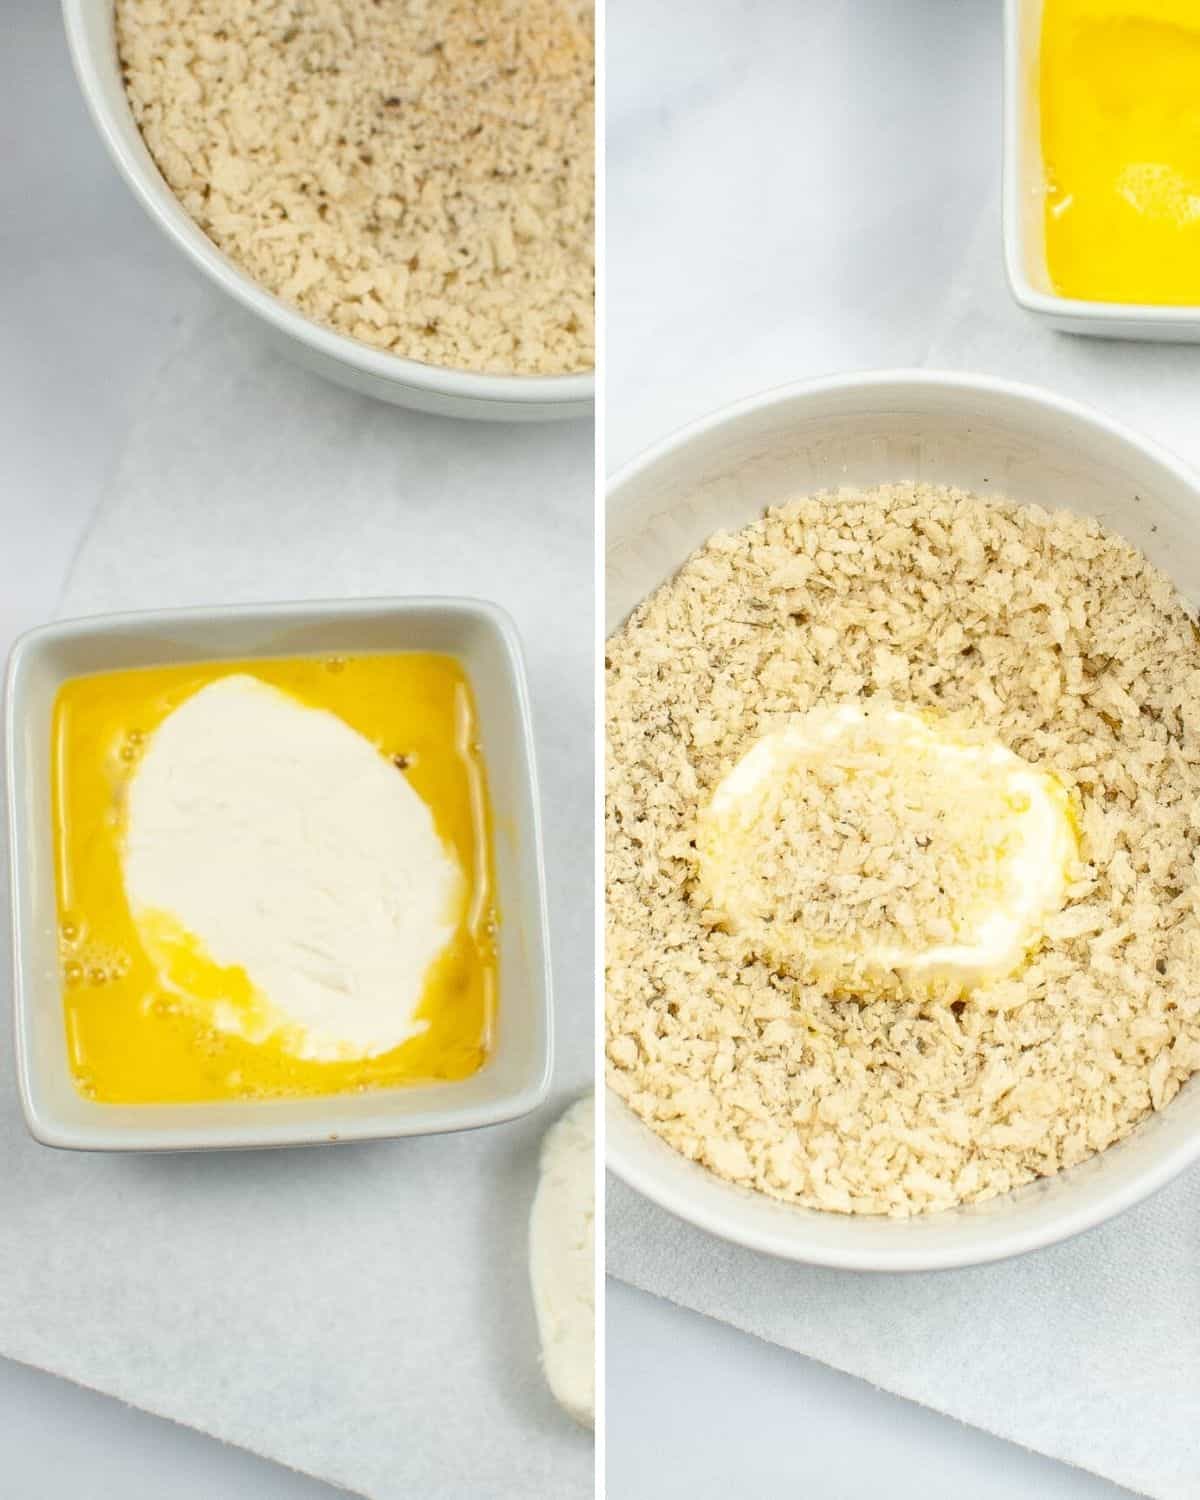 two photos, the first is sliced mozzarella in an egg wash. The second is the mozzarella in Panko bread crumbs. b